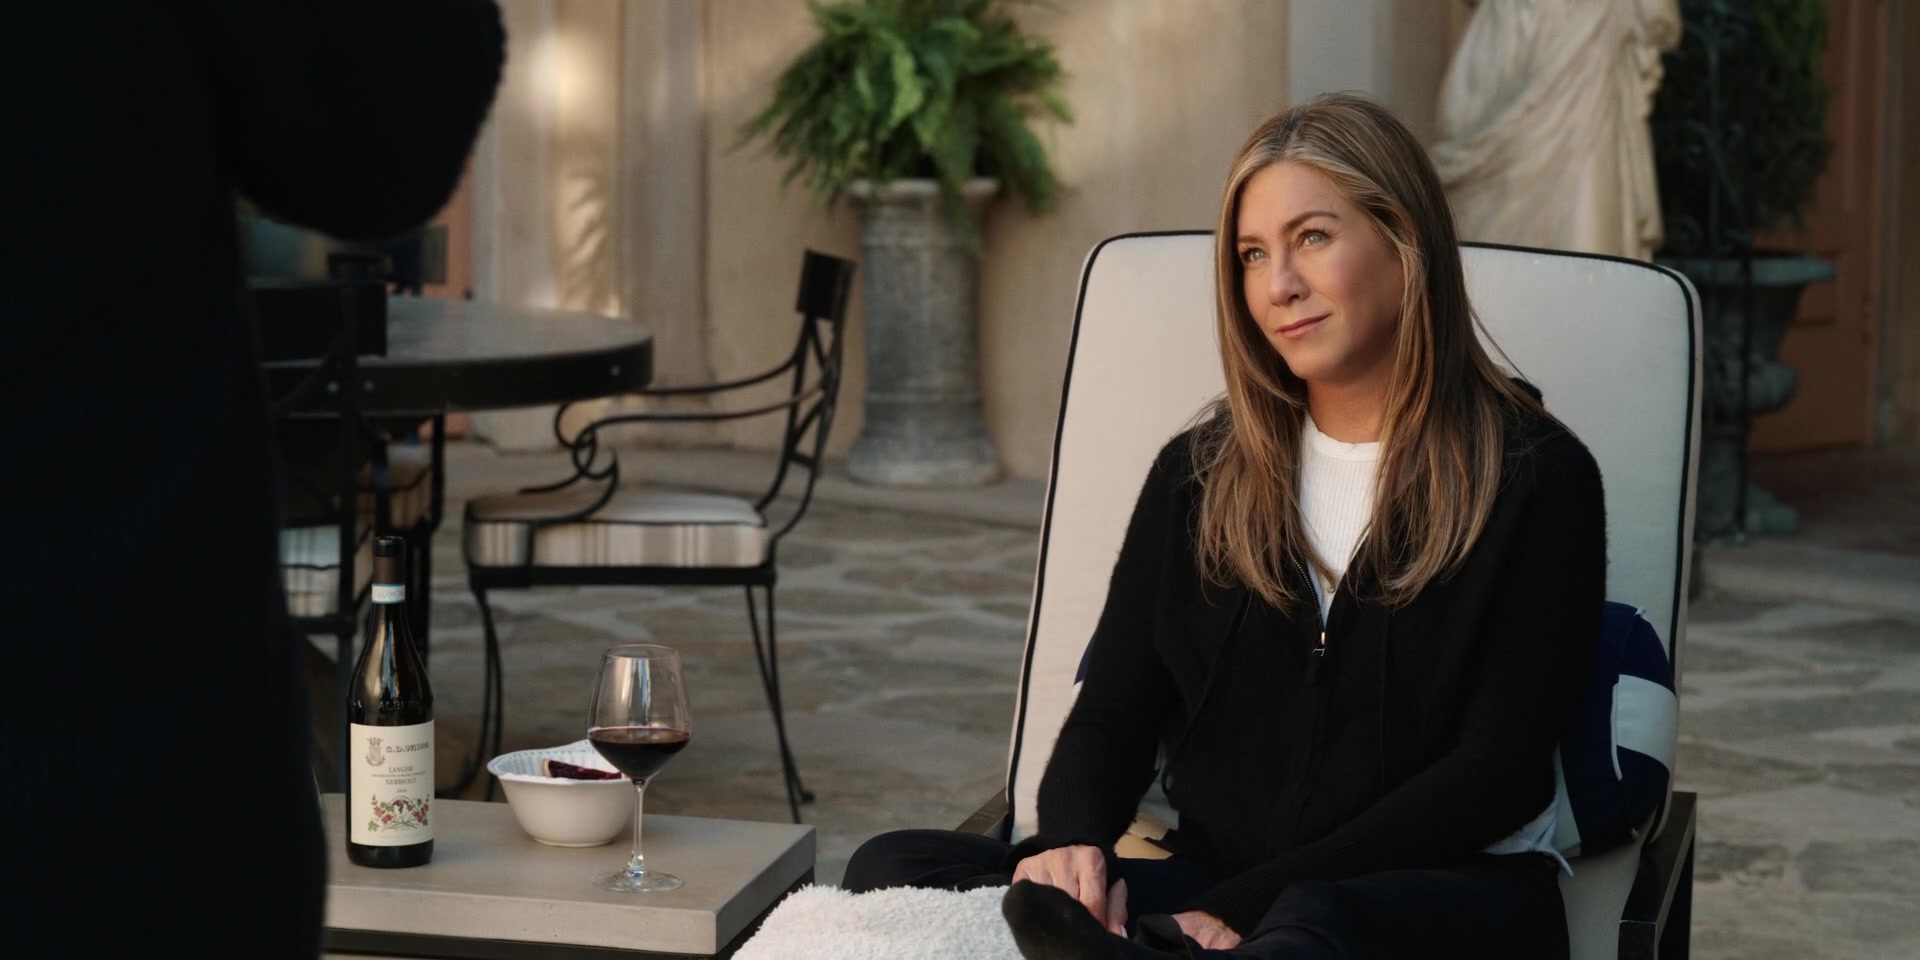 . Vajra Langhe Nebbiolo Wine Enjoyed By Jennifer Aniston As Alex Levy  And Steve Carell As Mitch Kessler In The Morning Show S02E07 